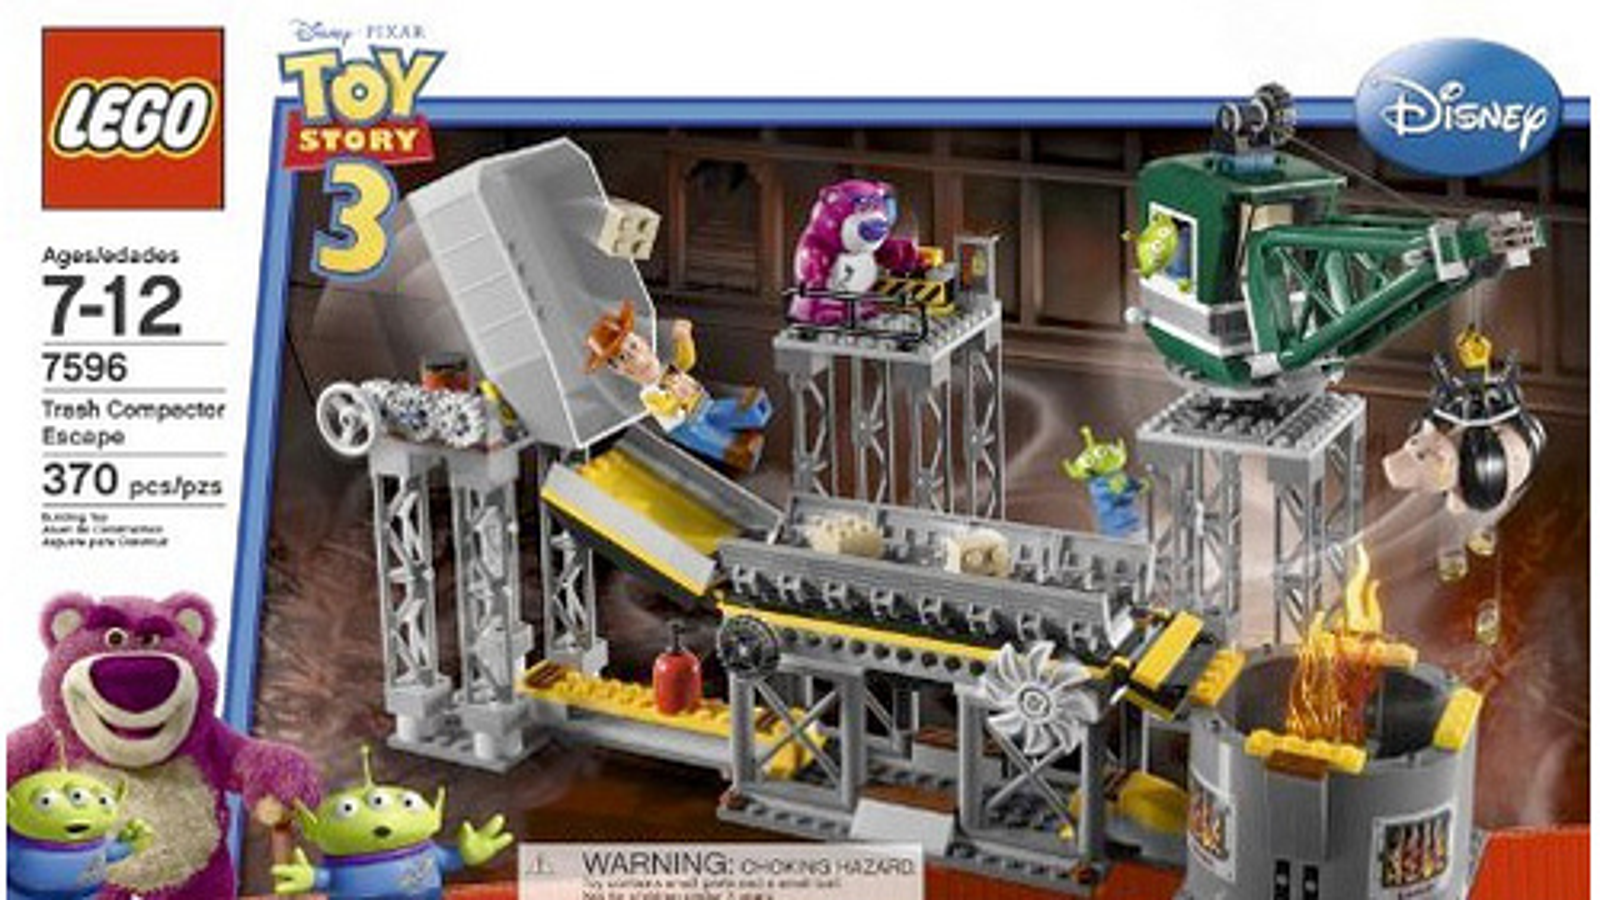 toy story 3 incinerator toy